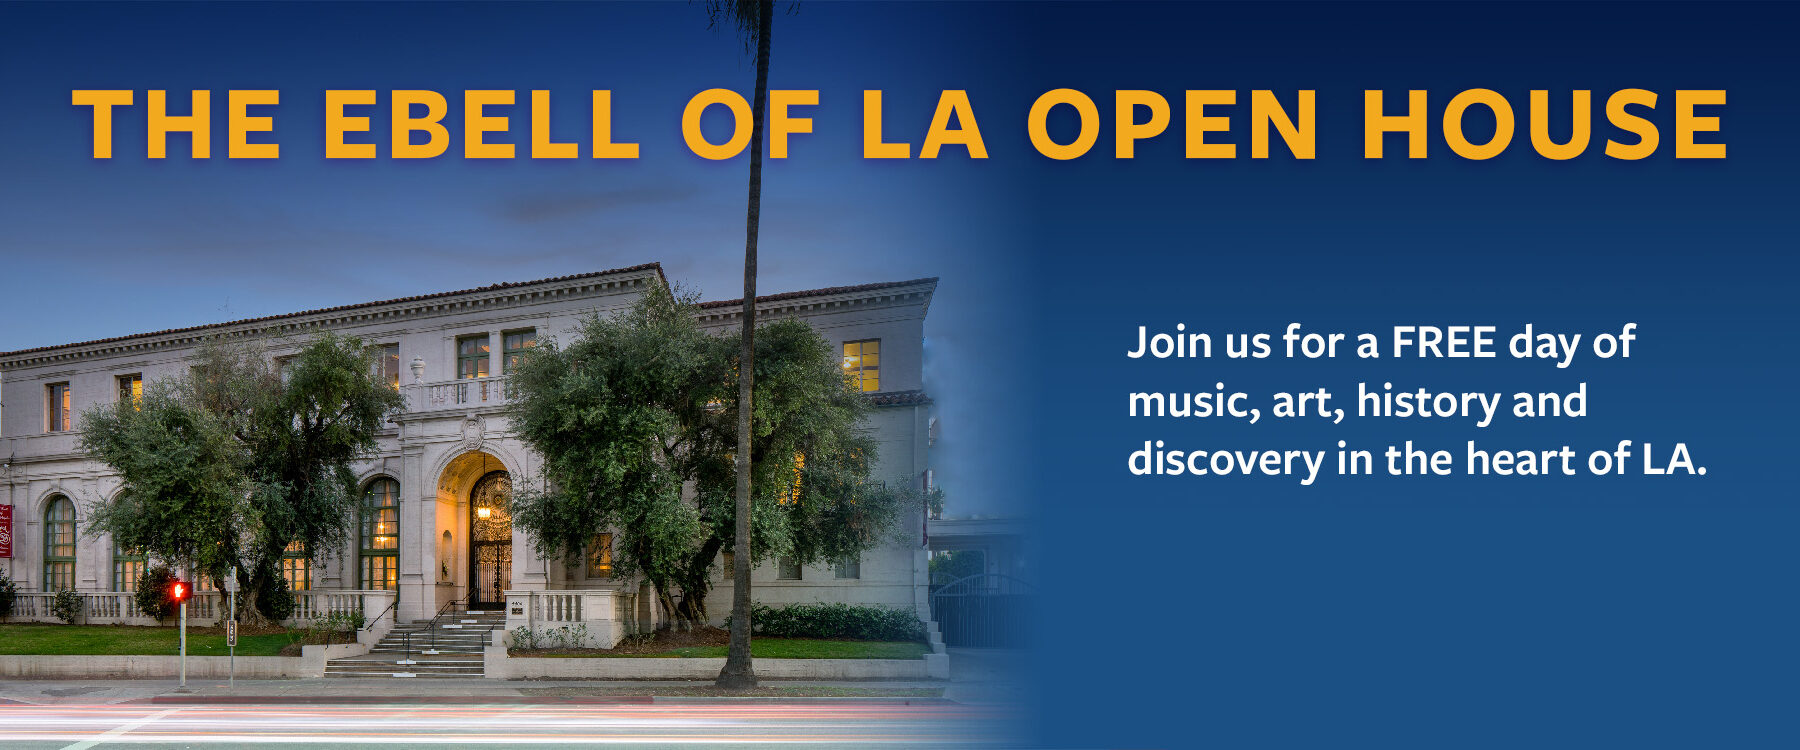 The Ebell of LA Open House